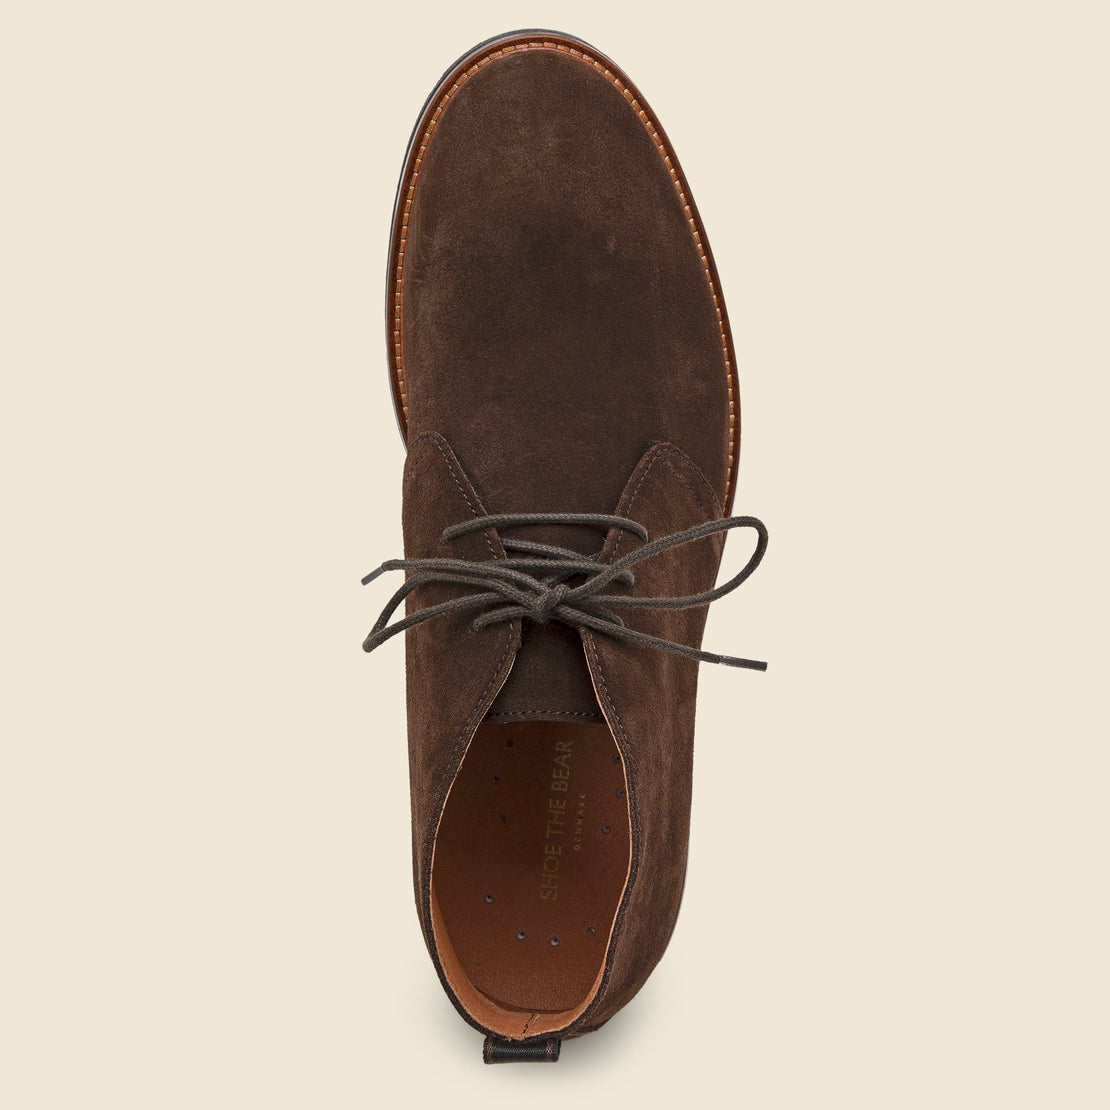 Kip Suede Chukka Boot - Brown - Shoe the Bear - STAG Provisions - Shoes - Boots / Chukkas